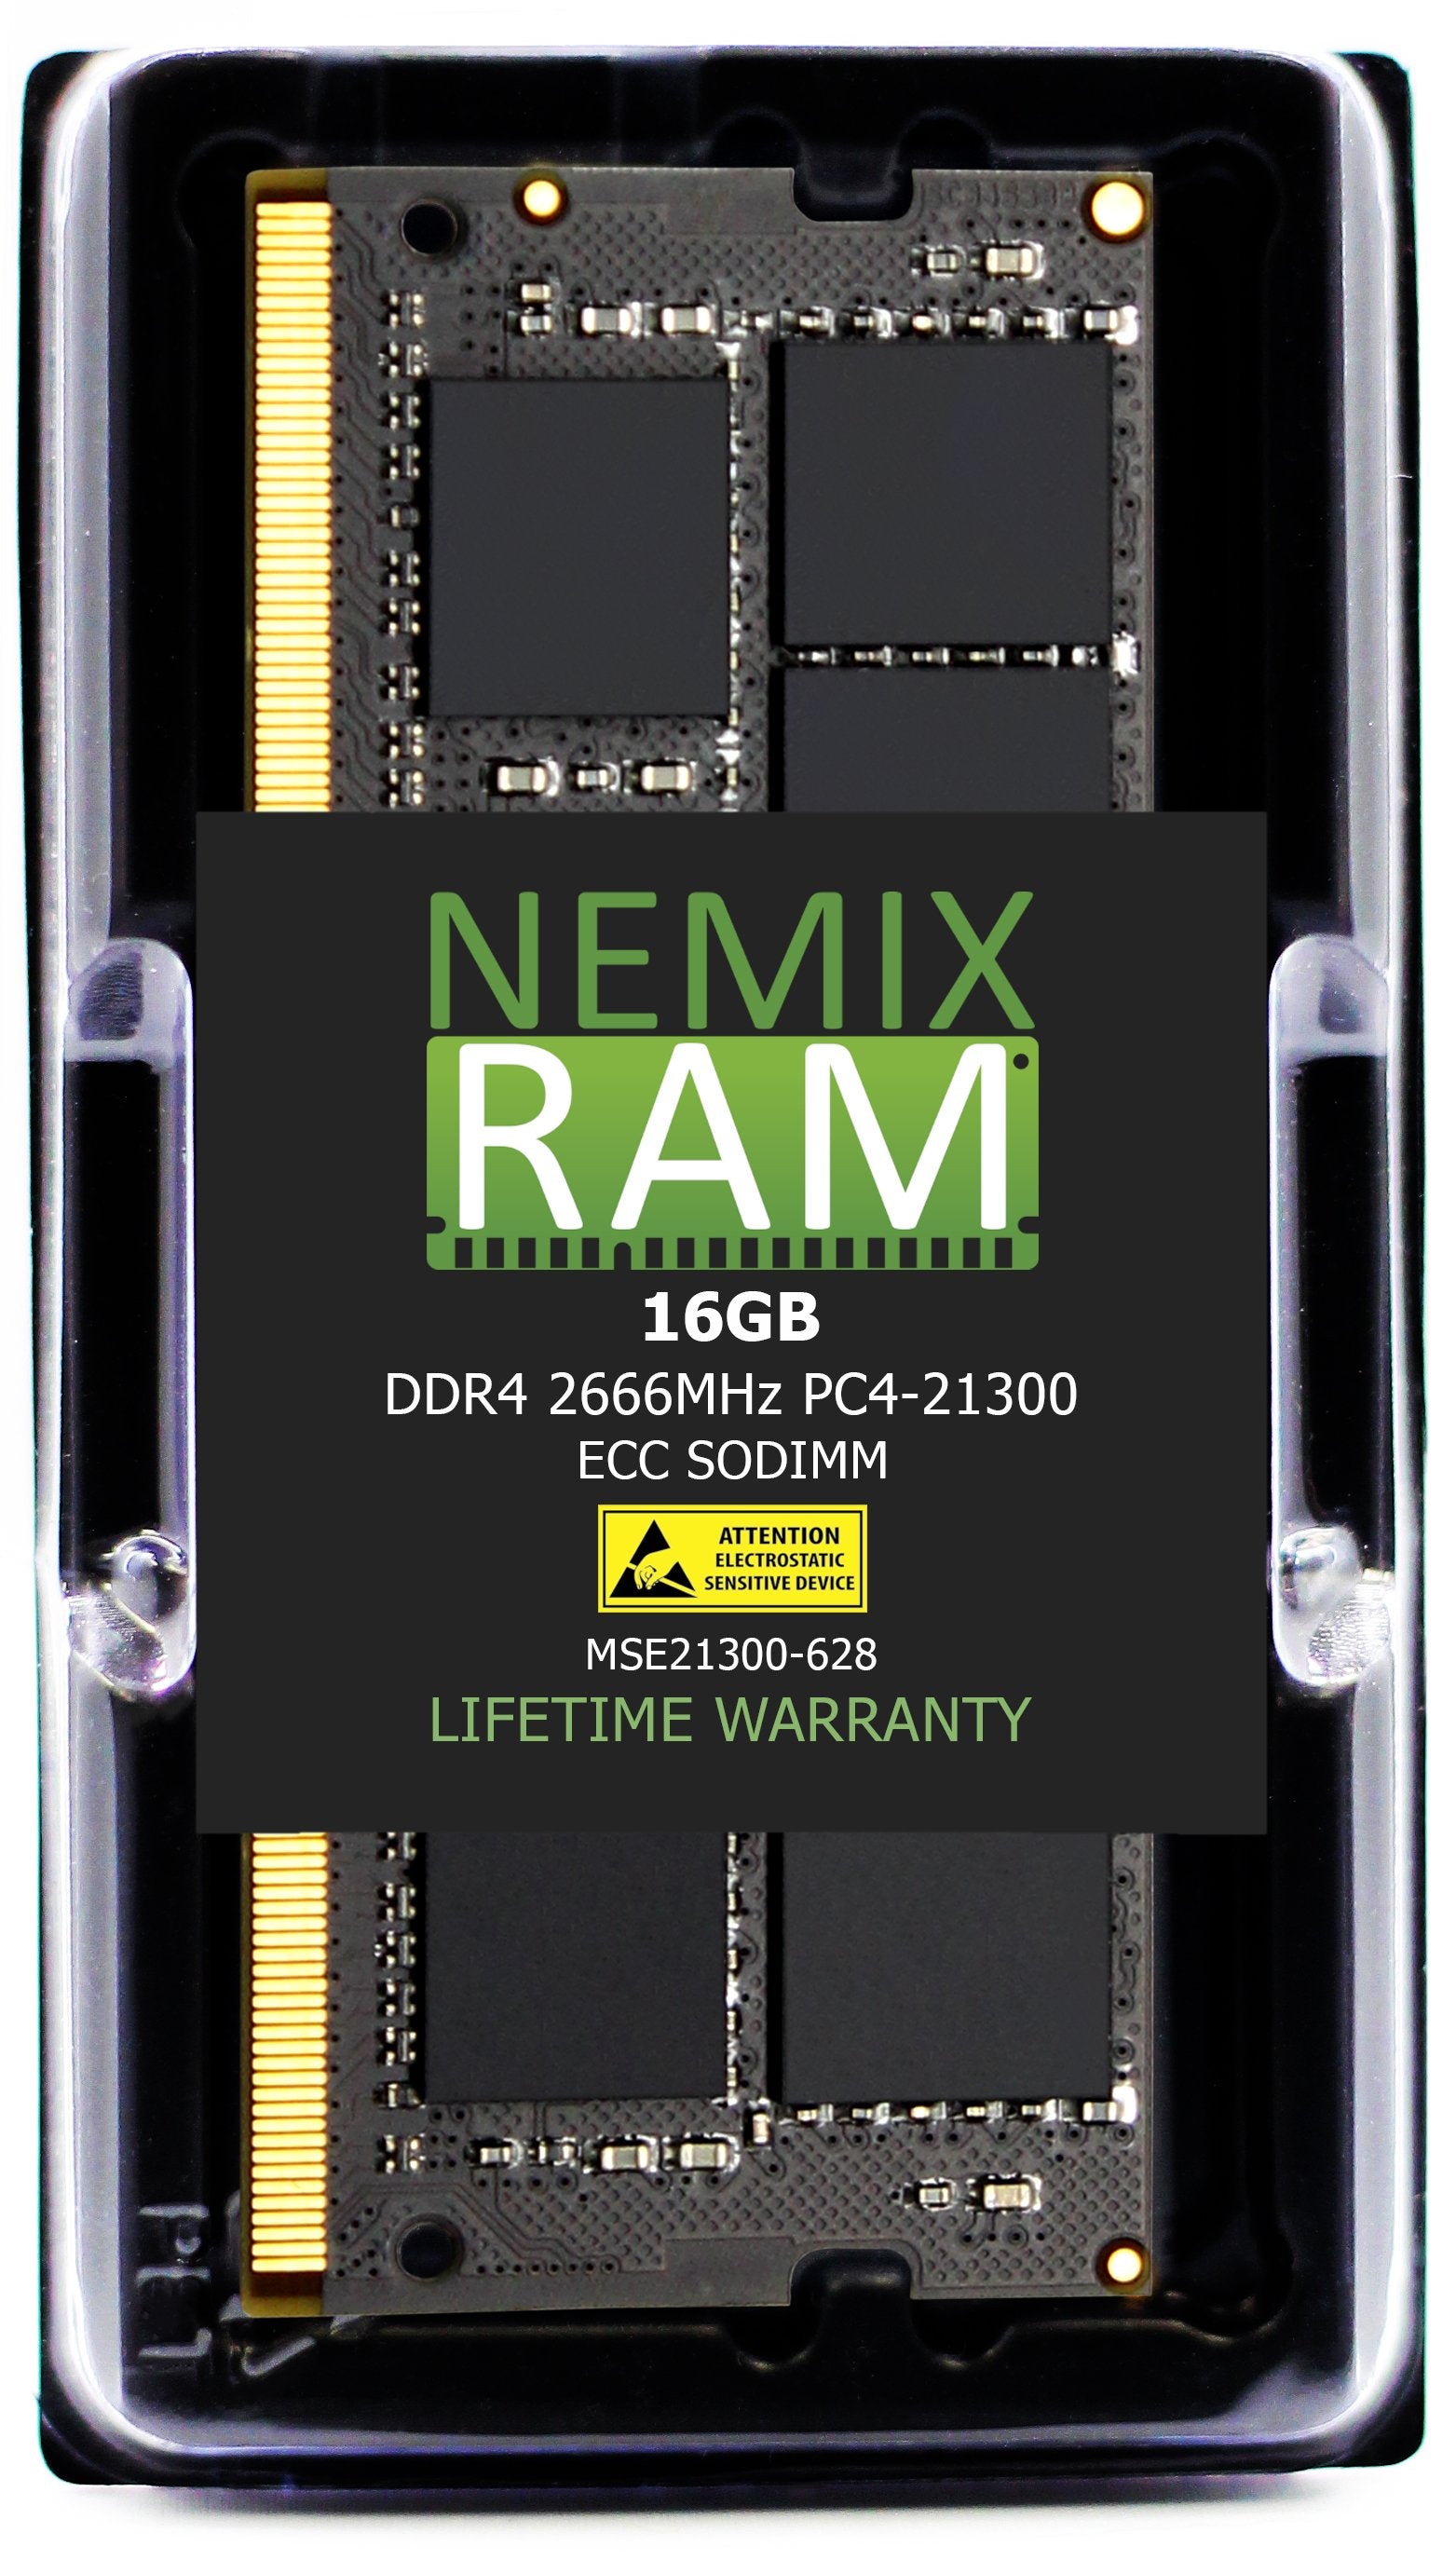 DDR4 2666MHZ PC4-21300 ECC SODIMM Compatible with Synology RackStation RS1221+/RS1221RP+